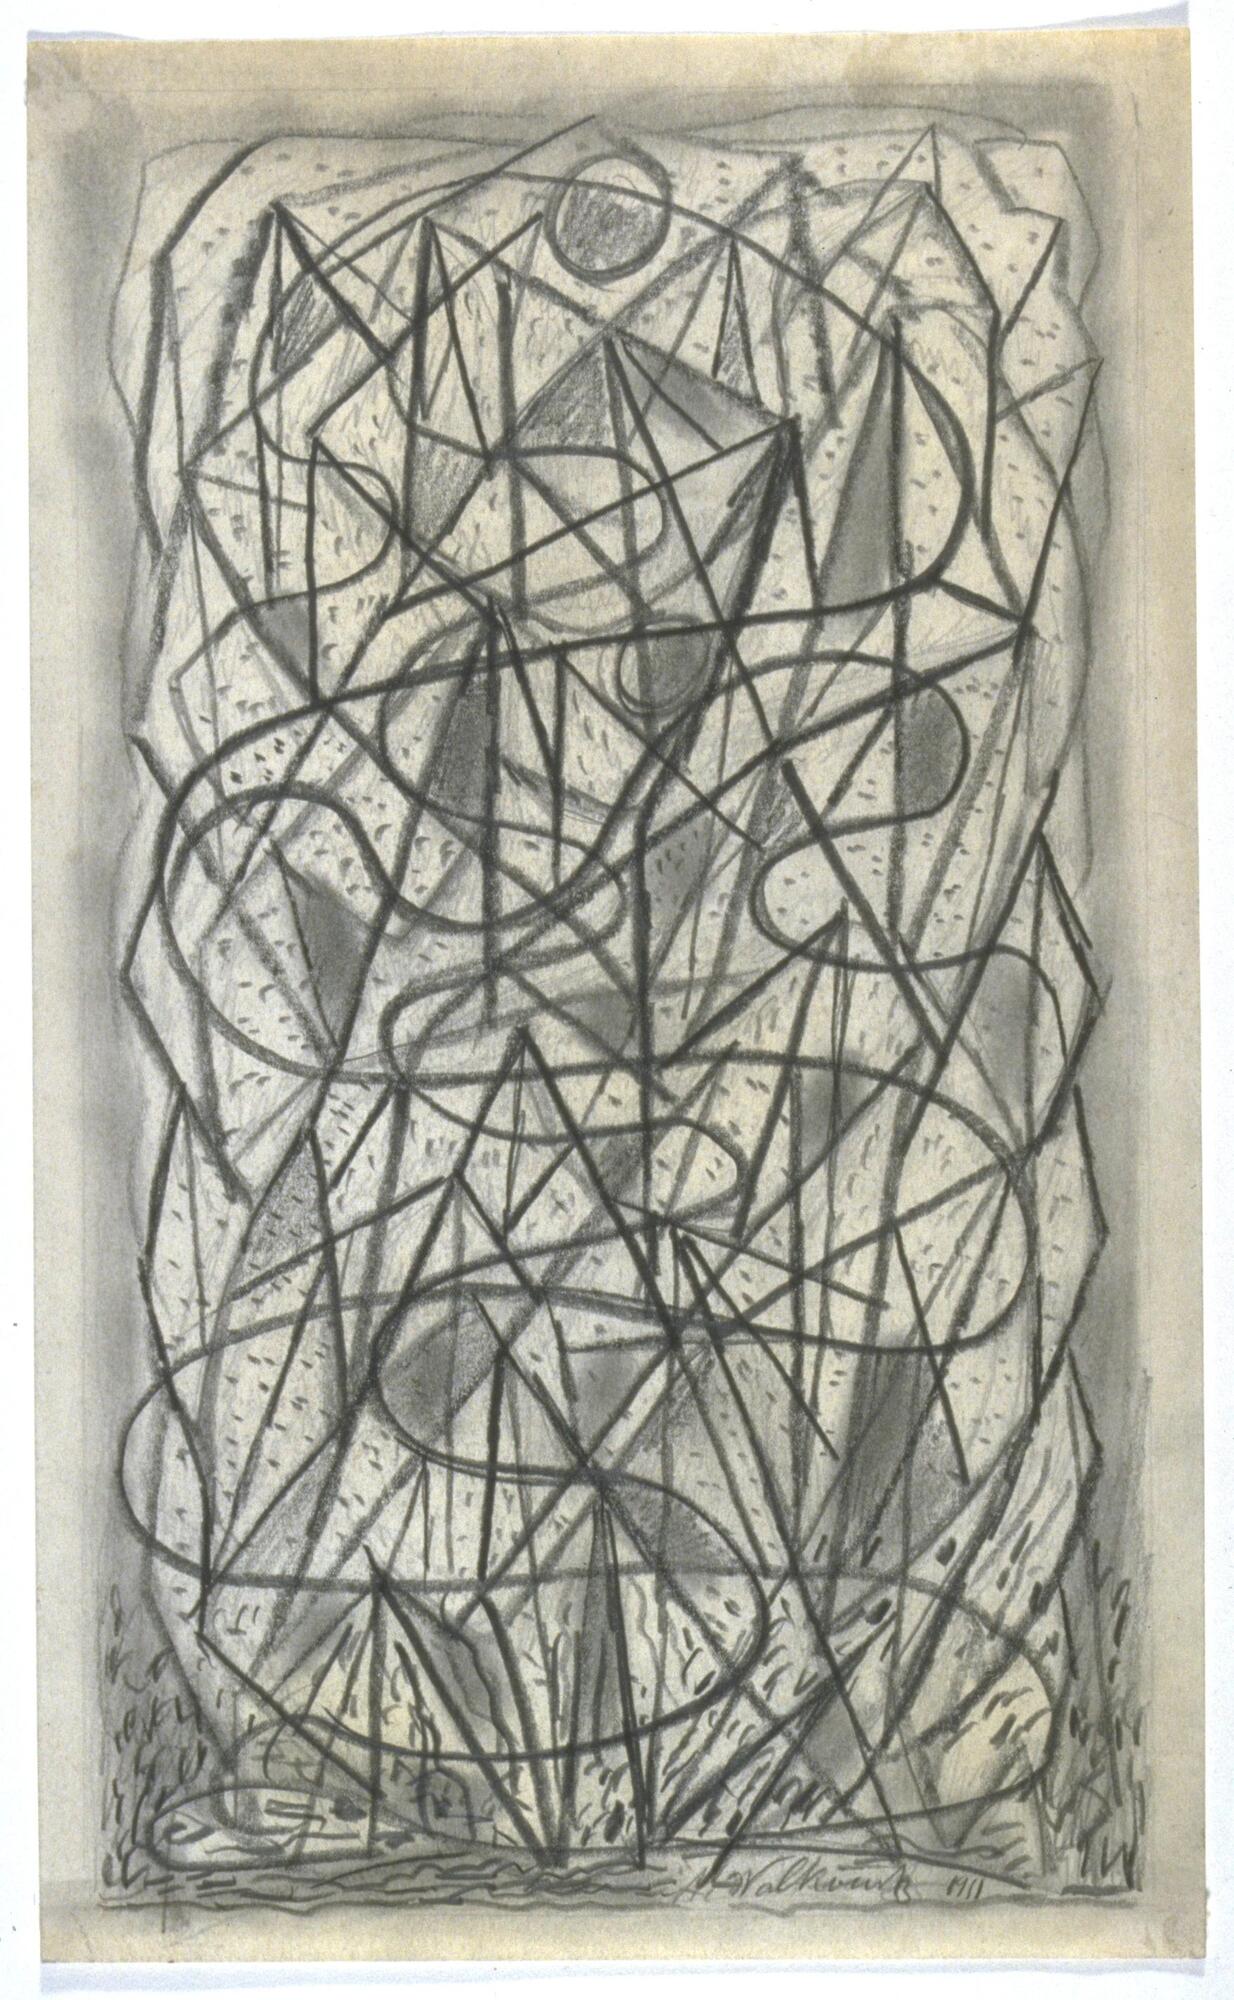 This is an abstract composition of loose, overall, intersecting lines. Some are rounded squiggles, others are straight, and a circle appears at the top. 